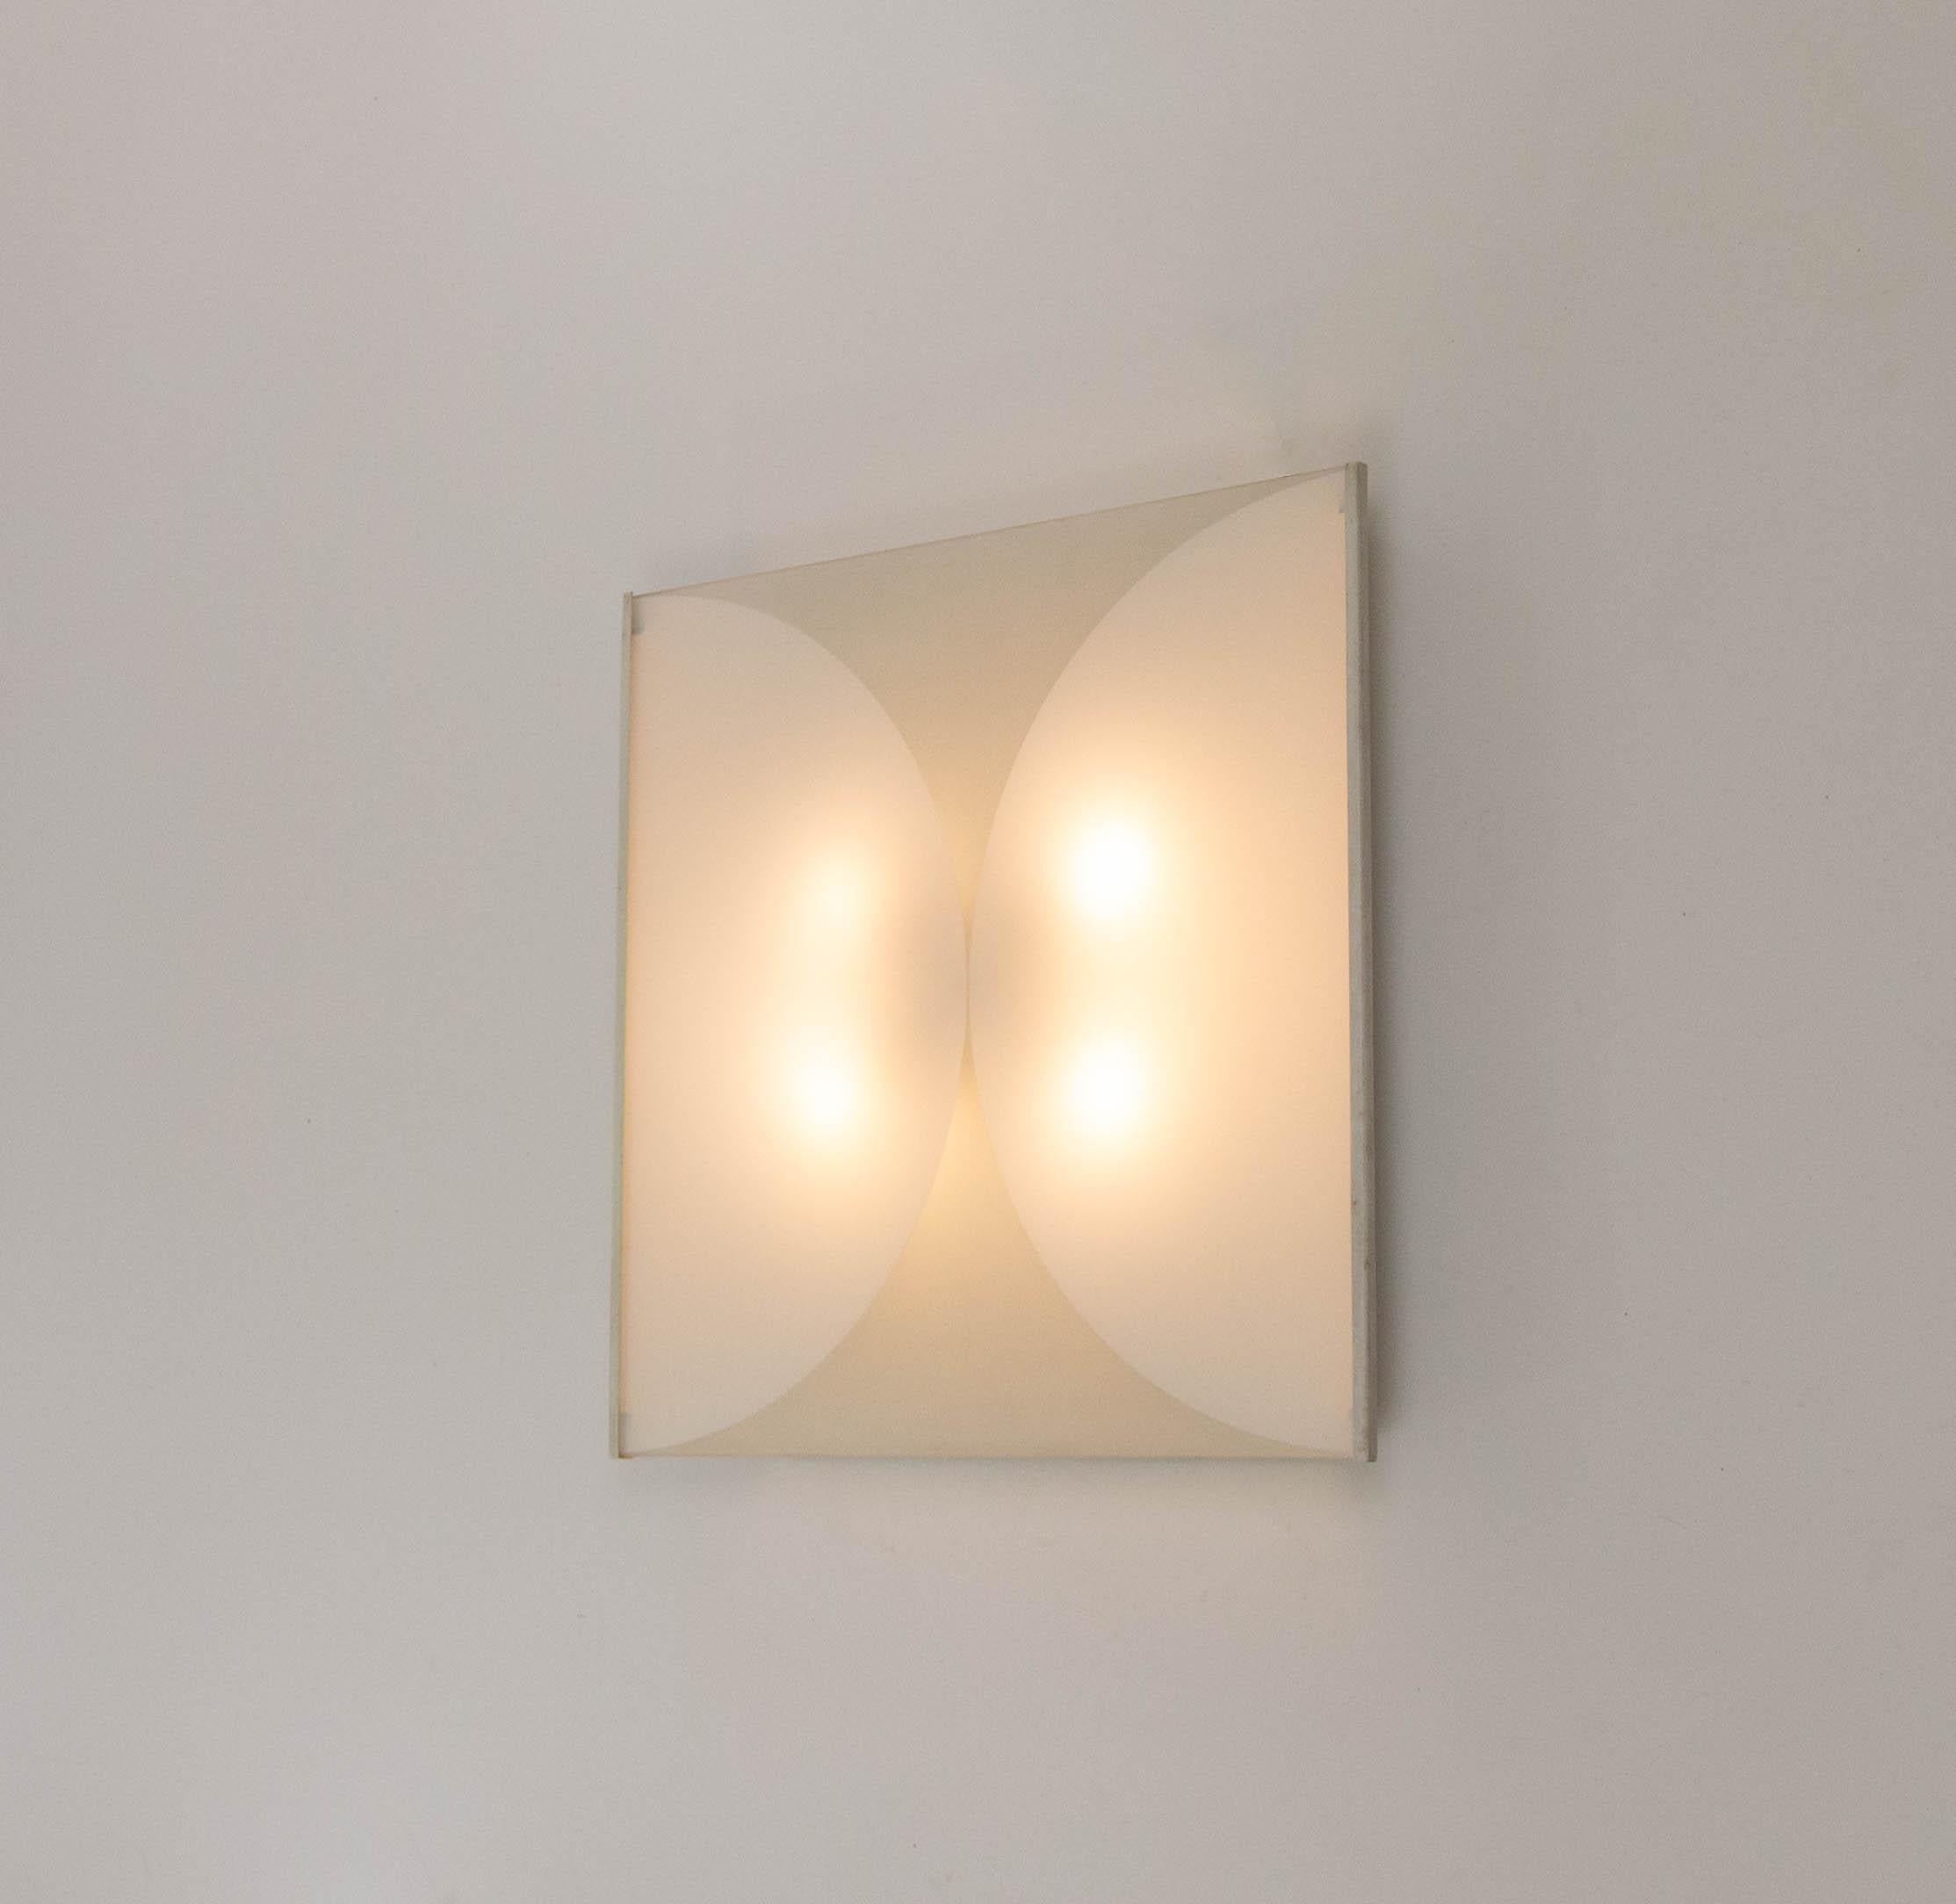 Large Clessidra wall or ceiling lamp designed by Bobo Piccoli and produced by Fontana Arte in the 1970s.

The lamp consists of a polished white square glass diffuser with frosted ornaments and a white lacquered metal structure.

The lamp is in very